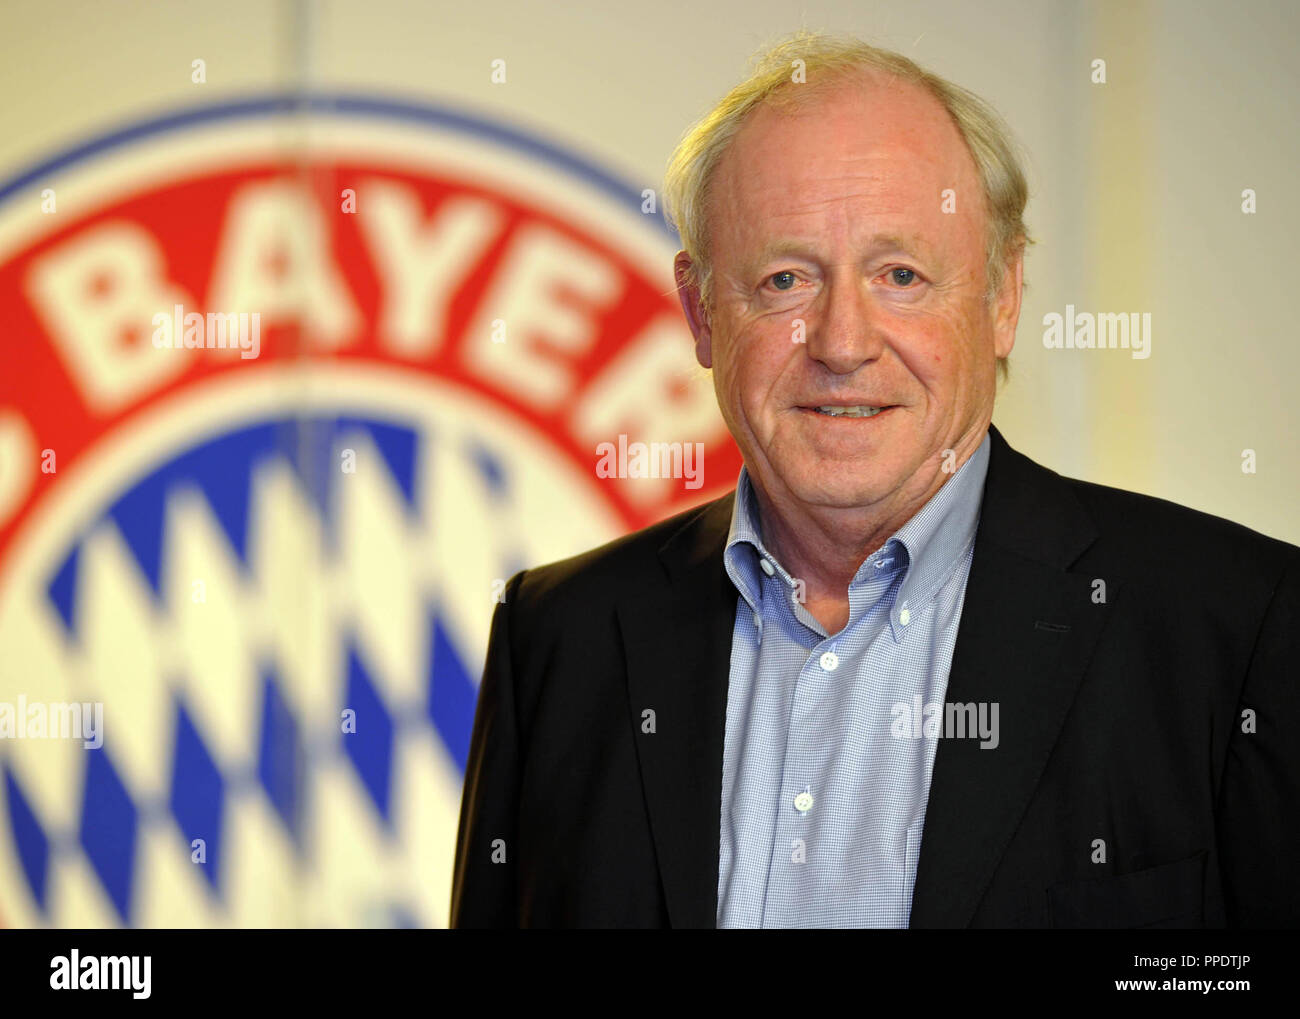 Rudolf Schels, founder of the Netto Marken-Discount supermarket chain, managing director of the real estate group Ratisbona in Regensburg and vice president of FC Bayern Munich with responsibility for basketball. Stock Photo